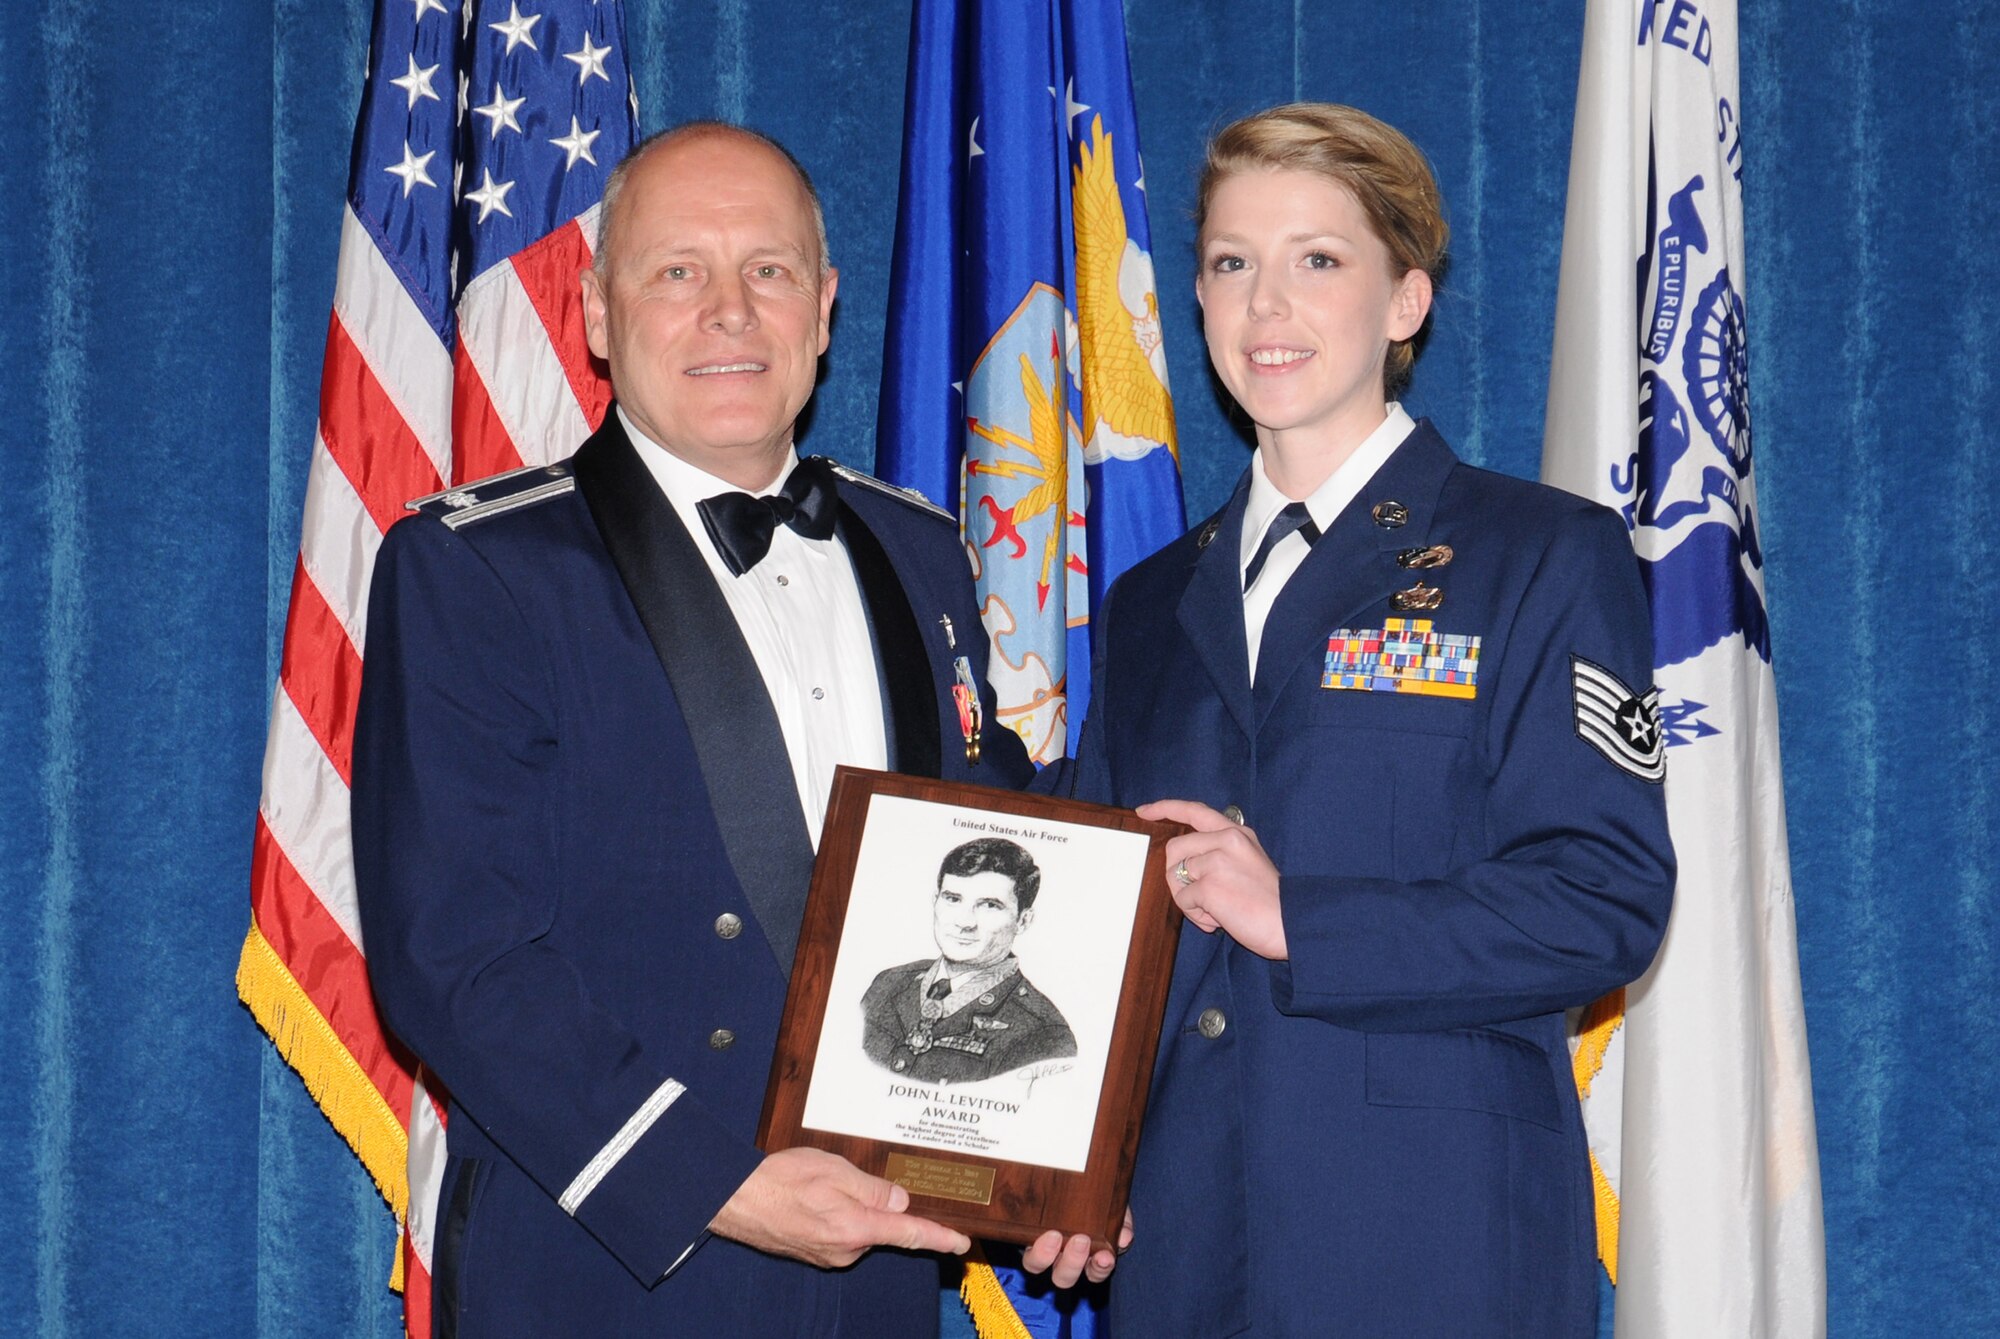 McGHEE TYSON AIR NATIONAL GUARD BASE, Tenn. -- Tech. Sgt. Rebekah L. Birt, right, a personnelist with the 125th Special Tactics Squadron, Oregon Air National Guard, receives the John L. Levitow Honor Award for NCO Academy Class 10-1 from Lt. Col. Stan Giles, left, at The I.G. Brown Air National Guard Training and Education Center here, Nov. 19, 2009.  The John L. Levitow Award is the highest honor awarded a graduate of any Air Force enlisted professional military education course.  (U.S. Air Force photo by Master Sgt. Kurt Skoglund/Released)